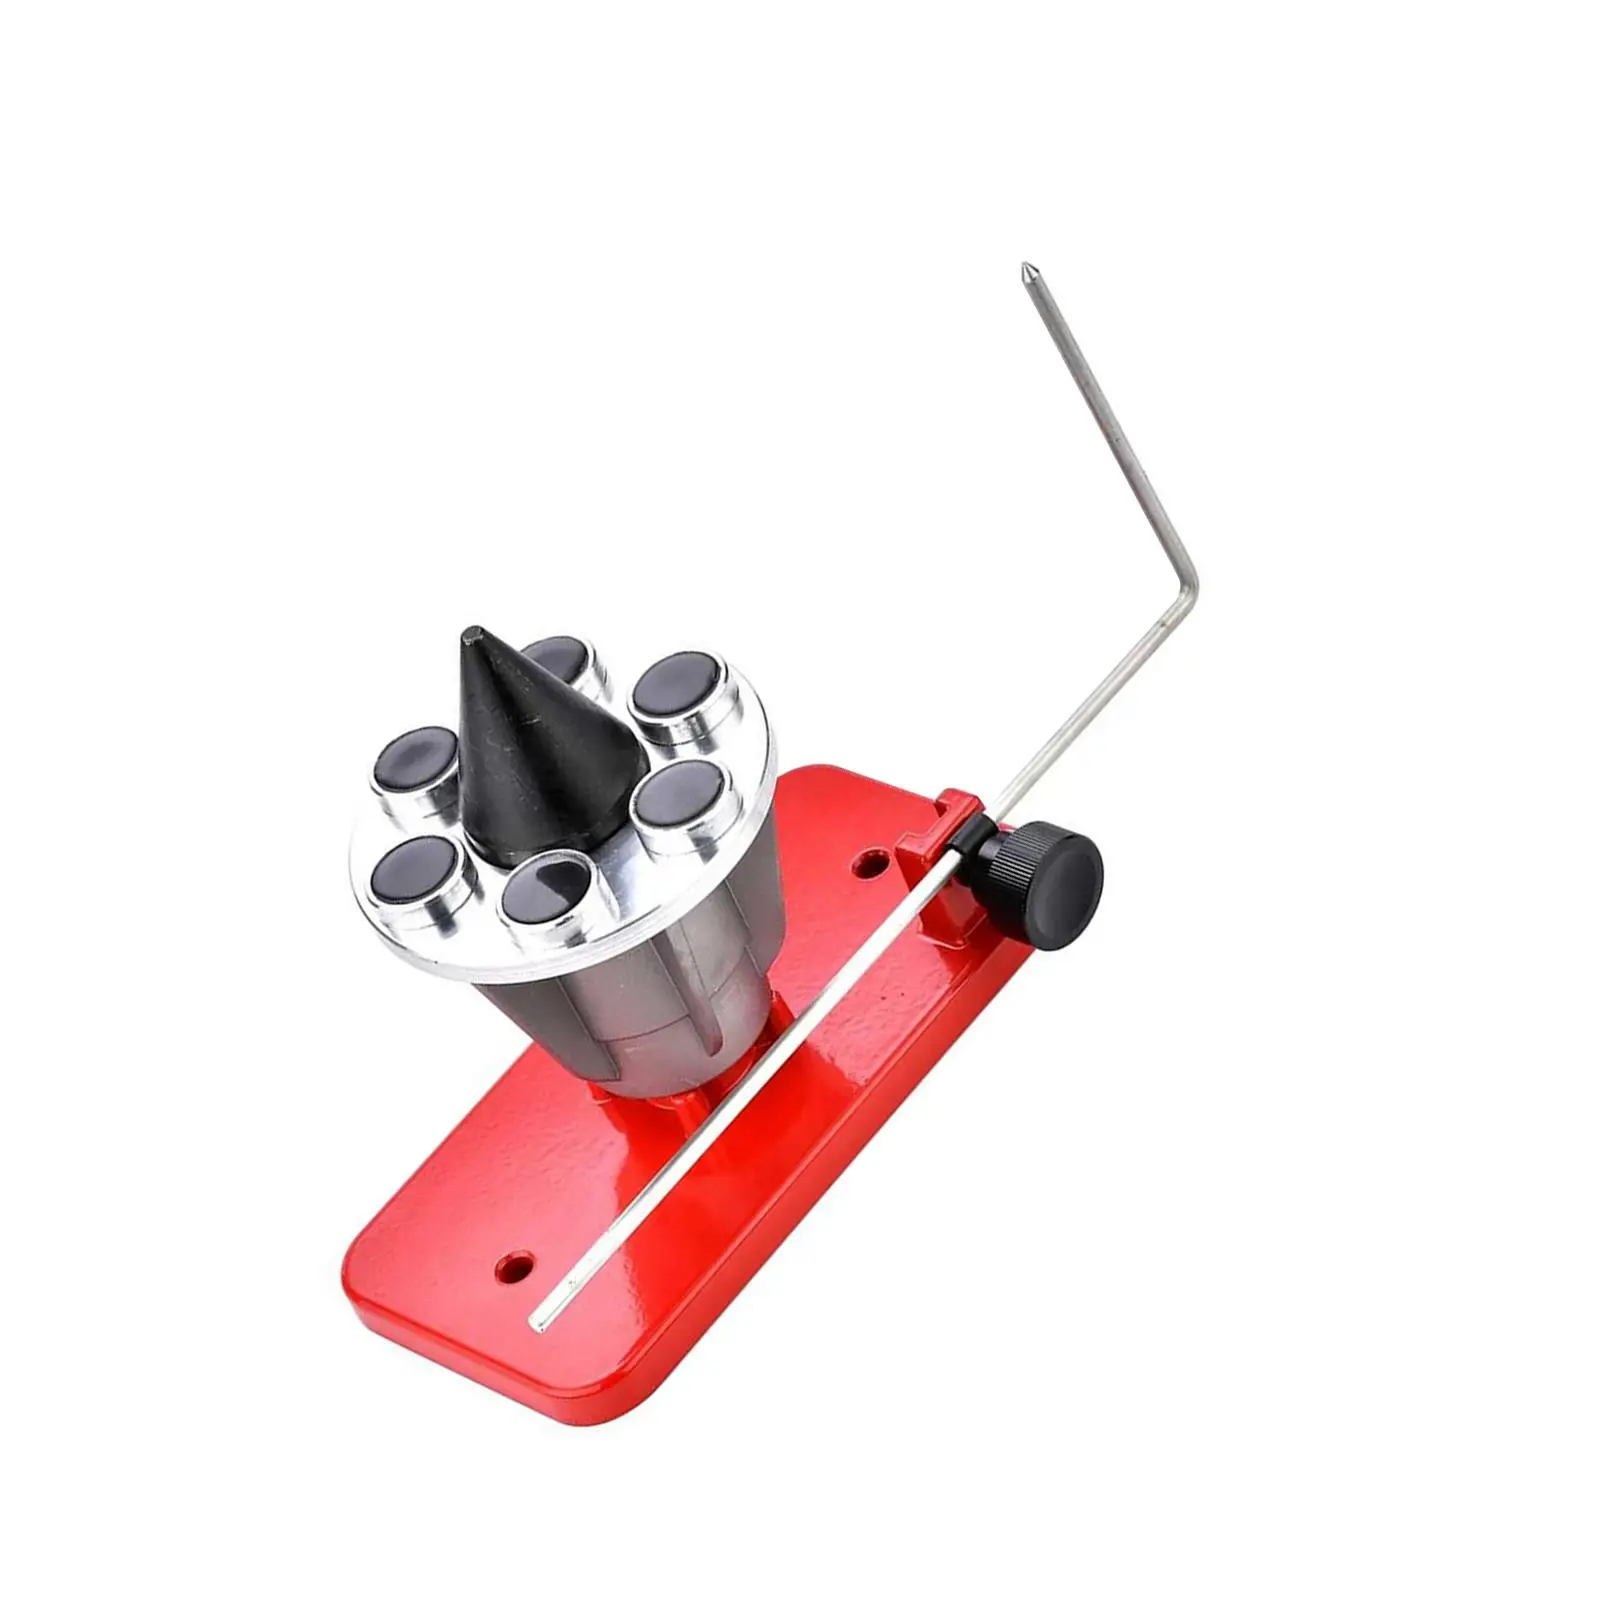 Universal Blade Balancer Wall Mount Durable Reduced Vibration Red Provide Smooth Cut 339075B 200mm for All Lawnmower Accessories